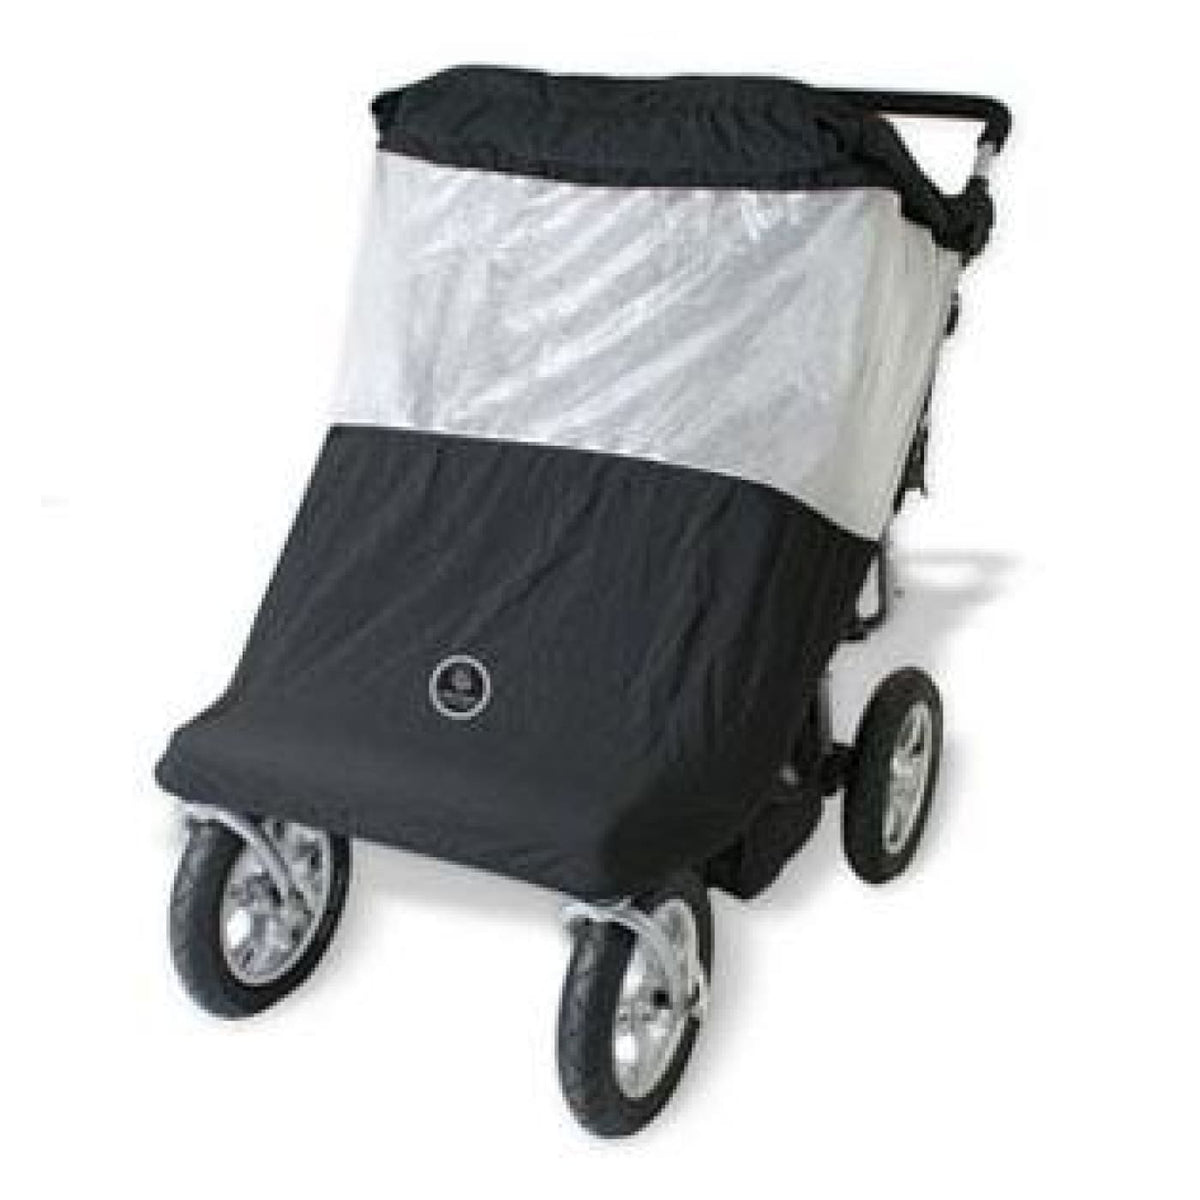 Veebee Sun Stopper for Side by Side Models - PRAMS &amp; STROLLERS - SUN COVERS/WEATHER SHIELDS